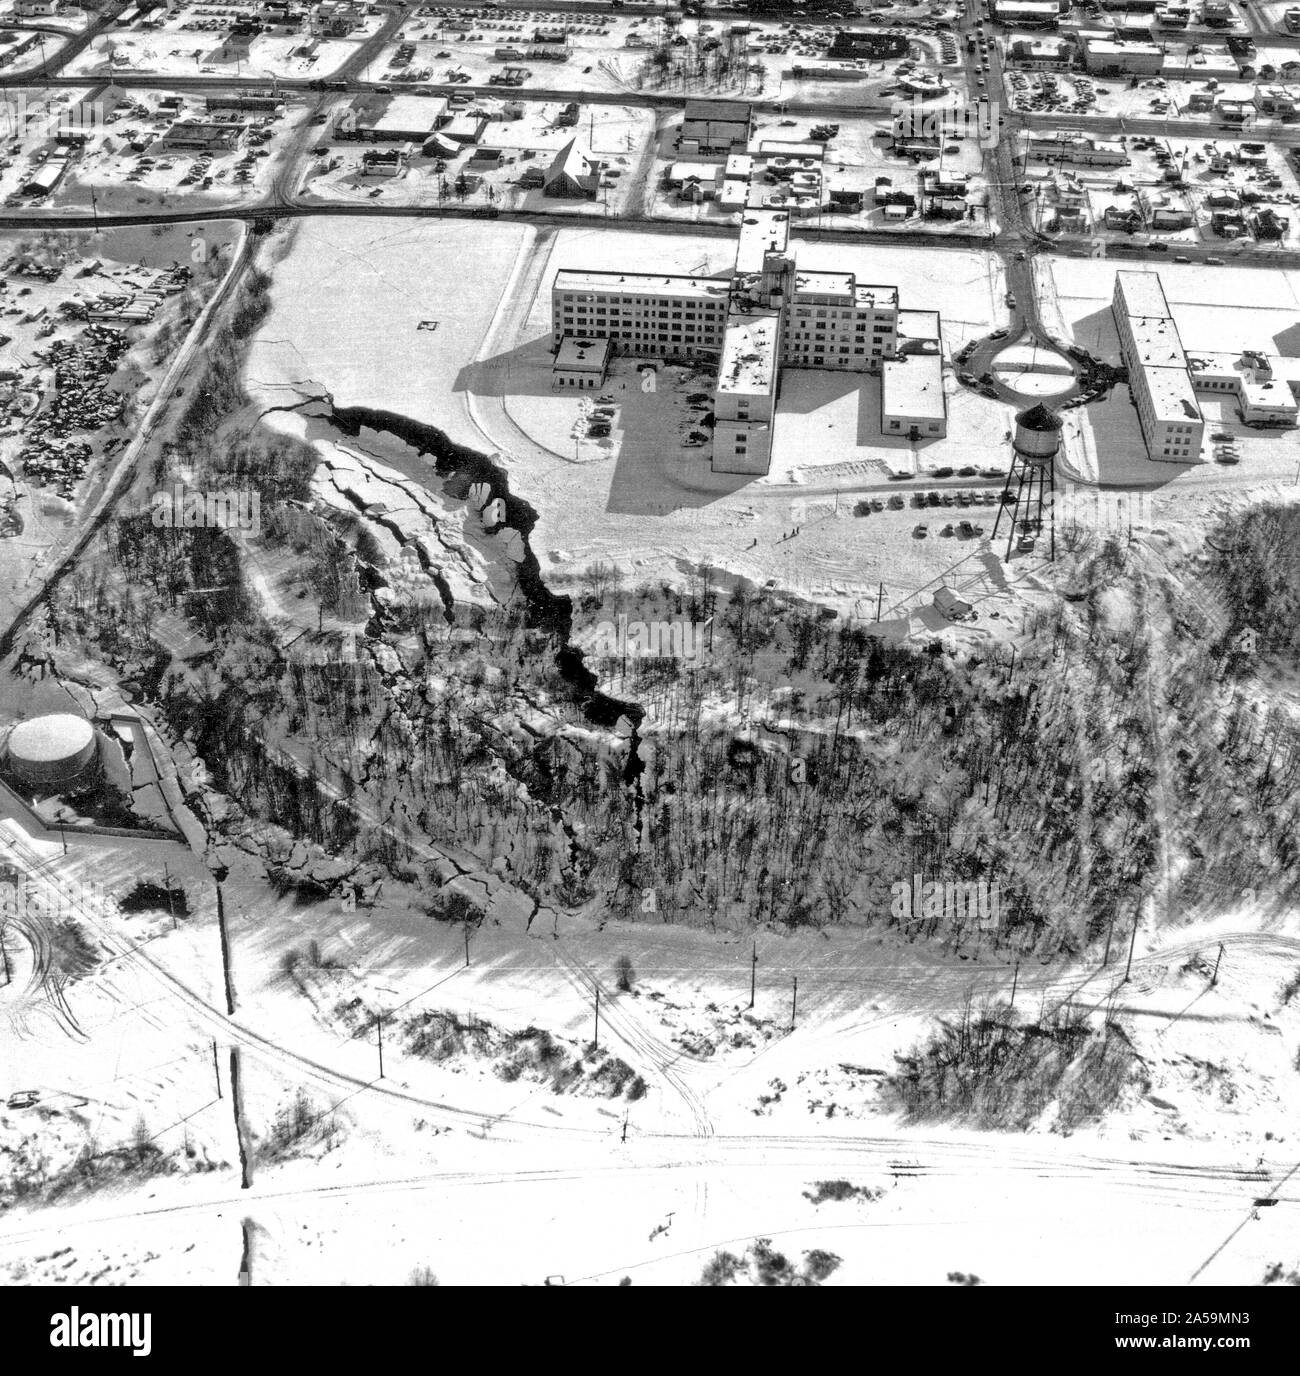 March 27, 1964 Alaska earthquake. The landslide occurred next to this hospital in Anchorage which is showing graben and pressure ridges. Stock Photo